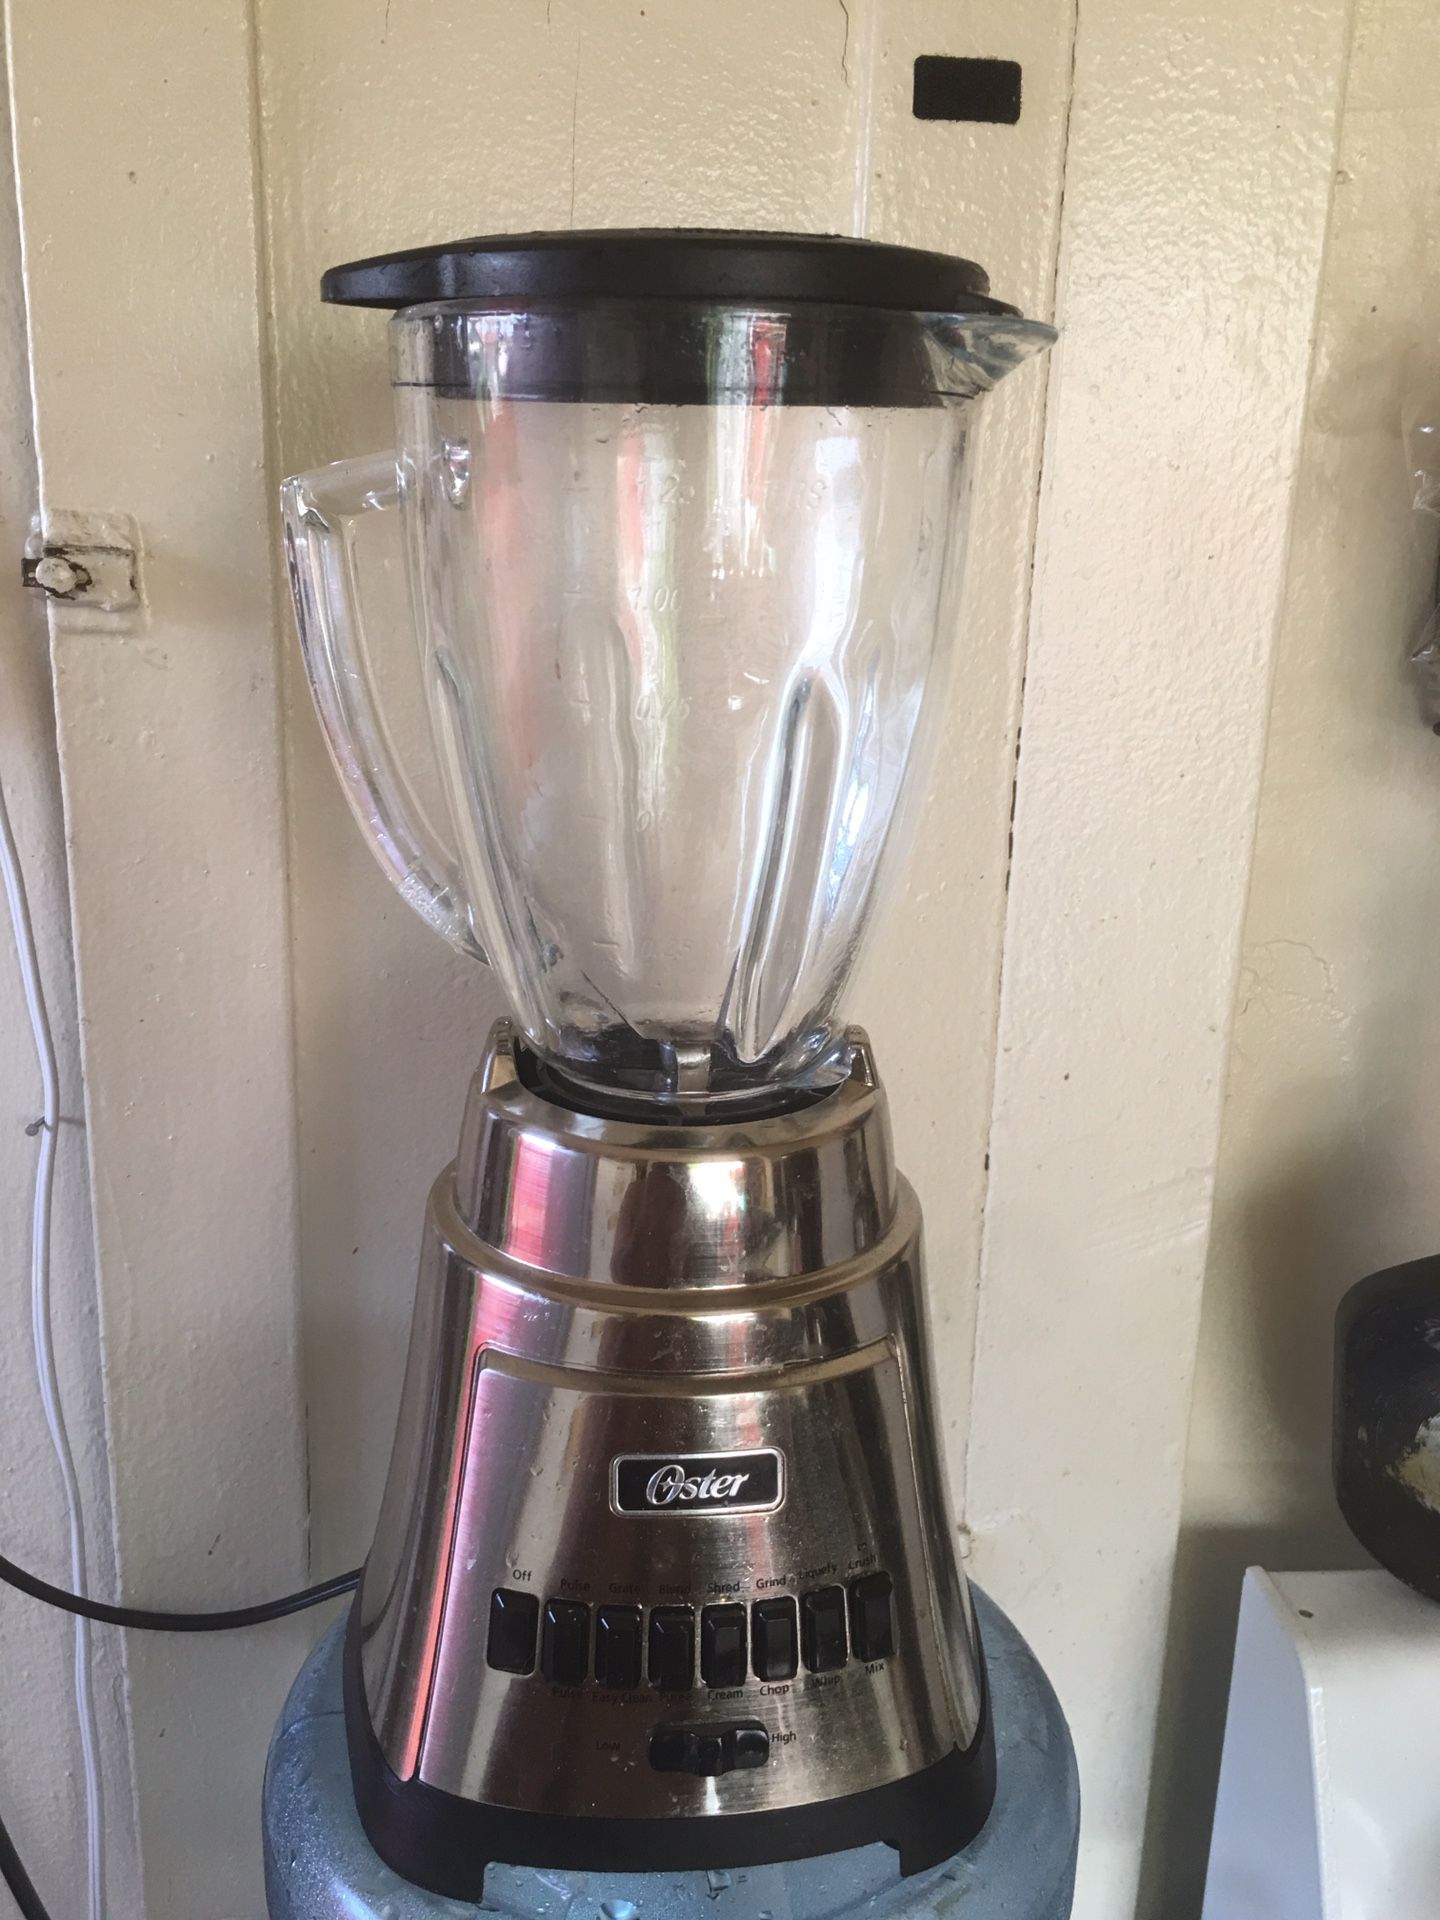 Oster blender $20.00 must pick up today